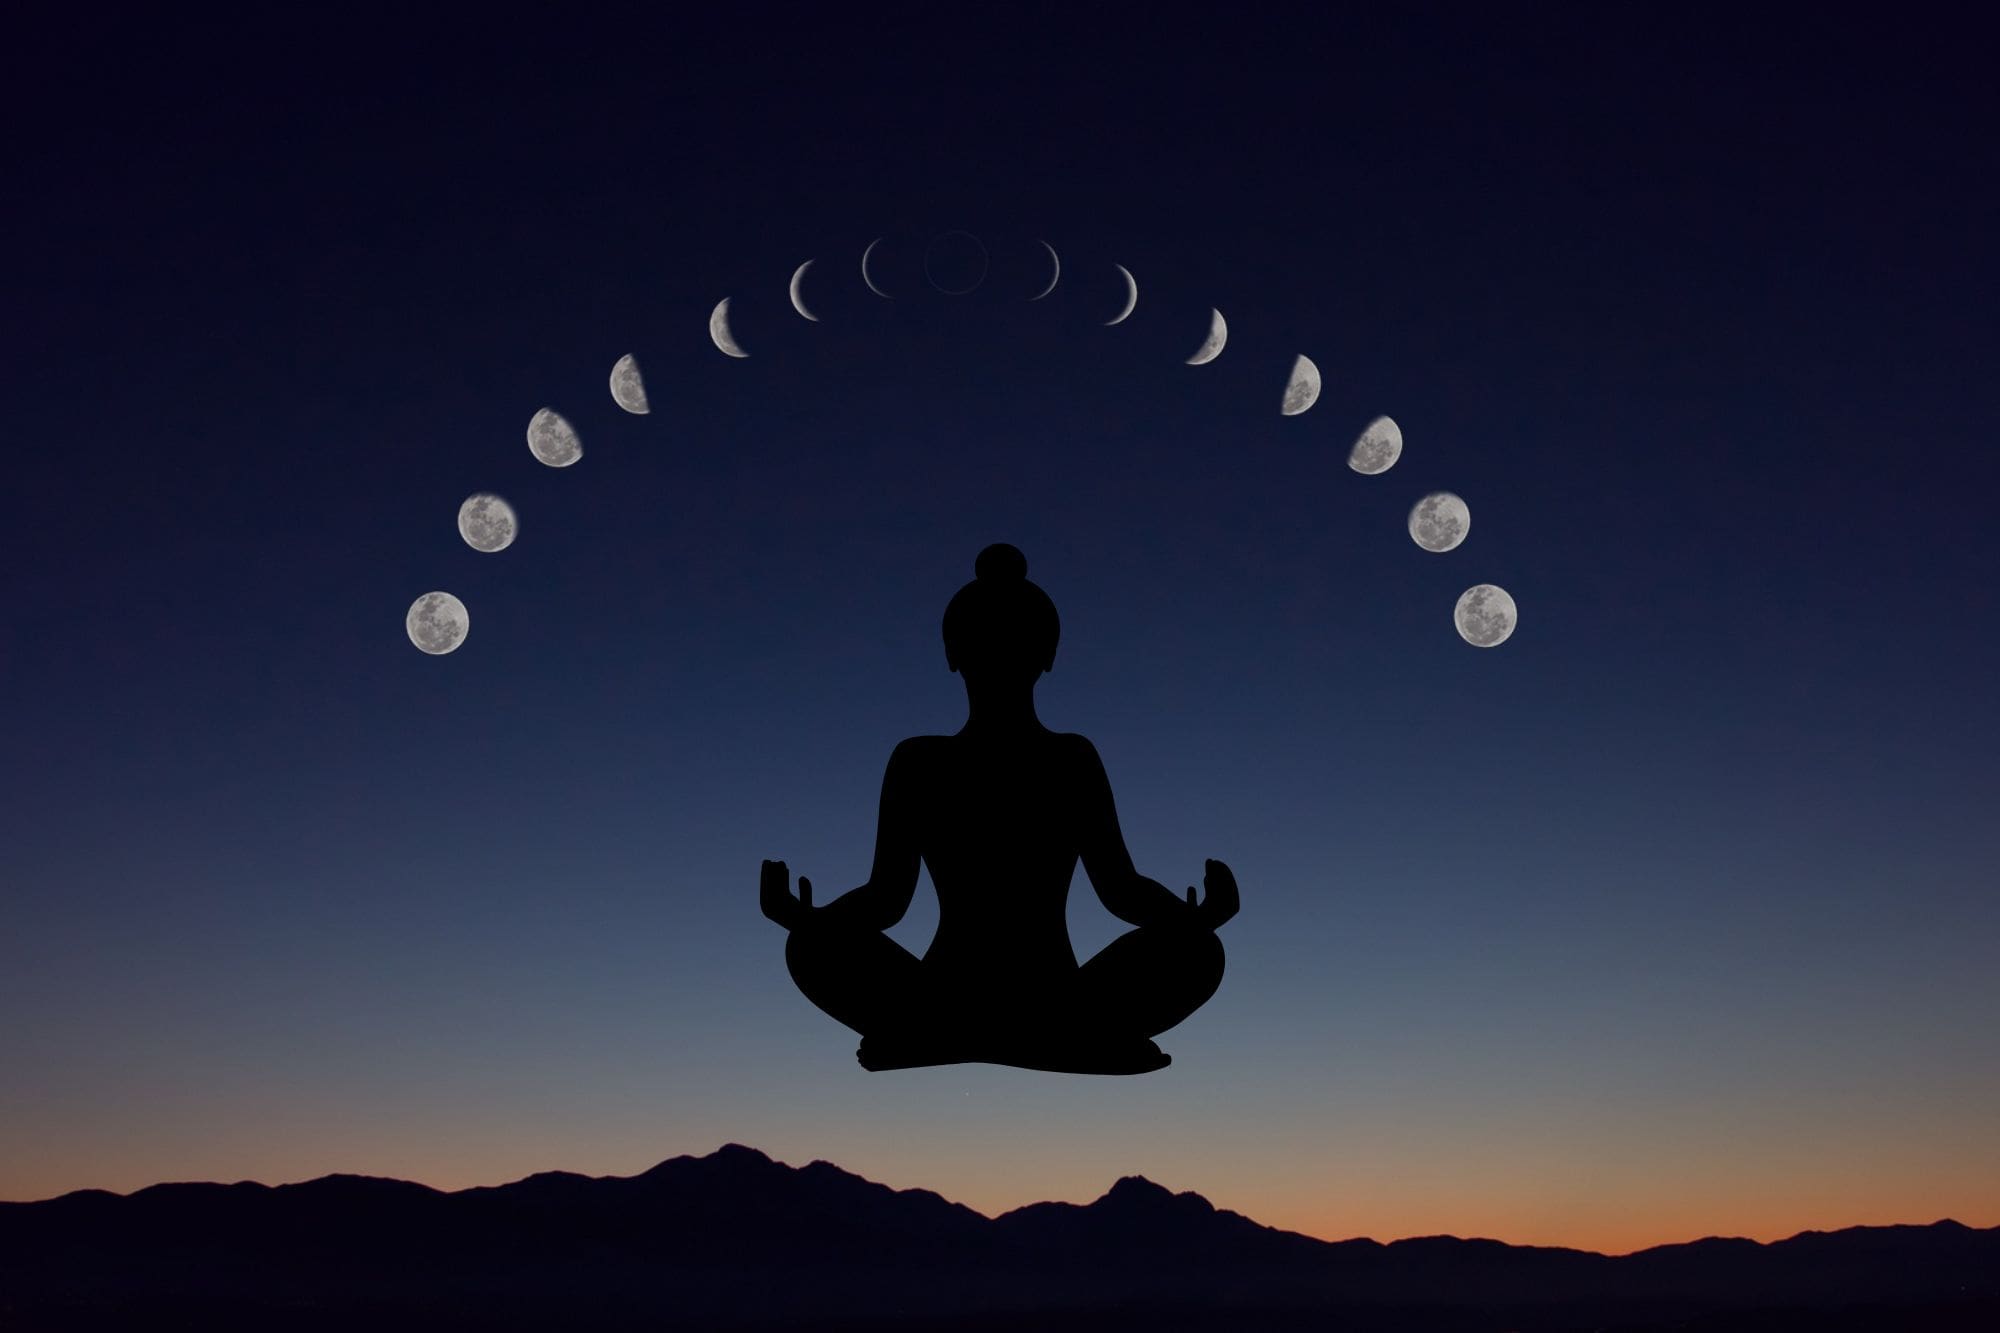 Phases of the Moon in the night sky with a graphic of a person in meditation pose underneath